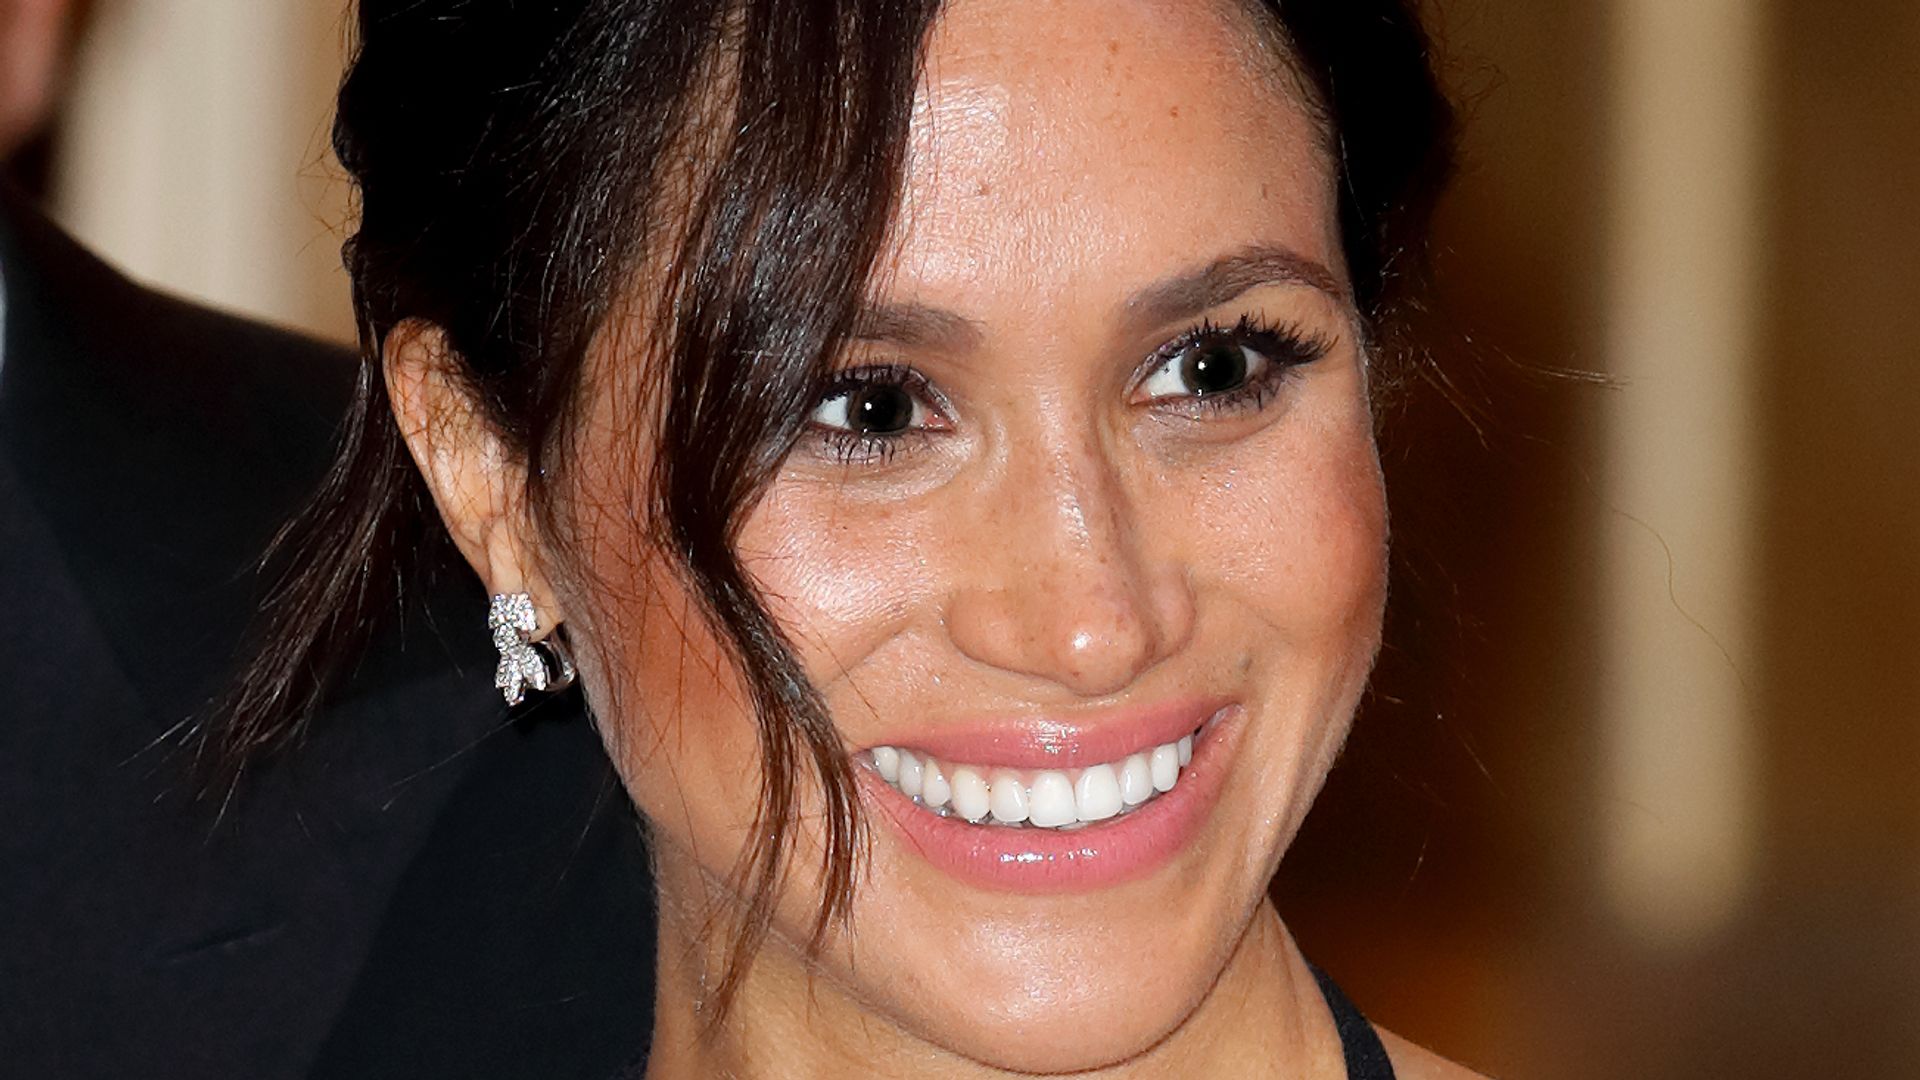 Meghan Markle attends the The Royal Variety Performance 2018 at the London Palladium 